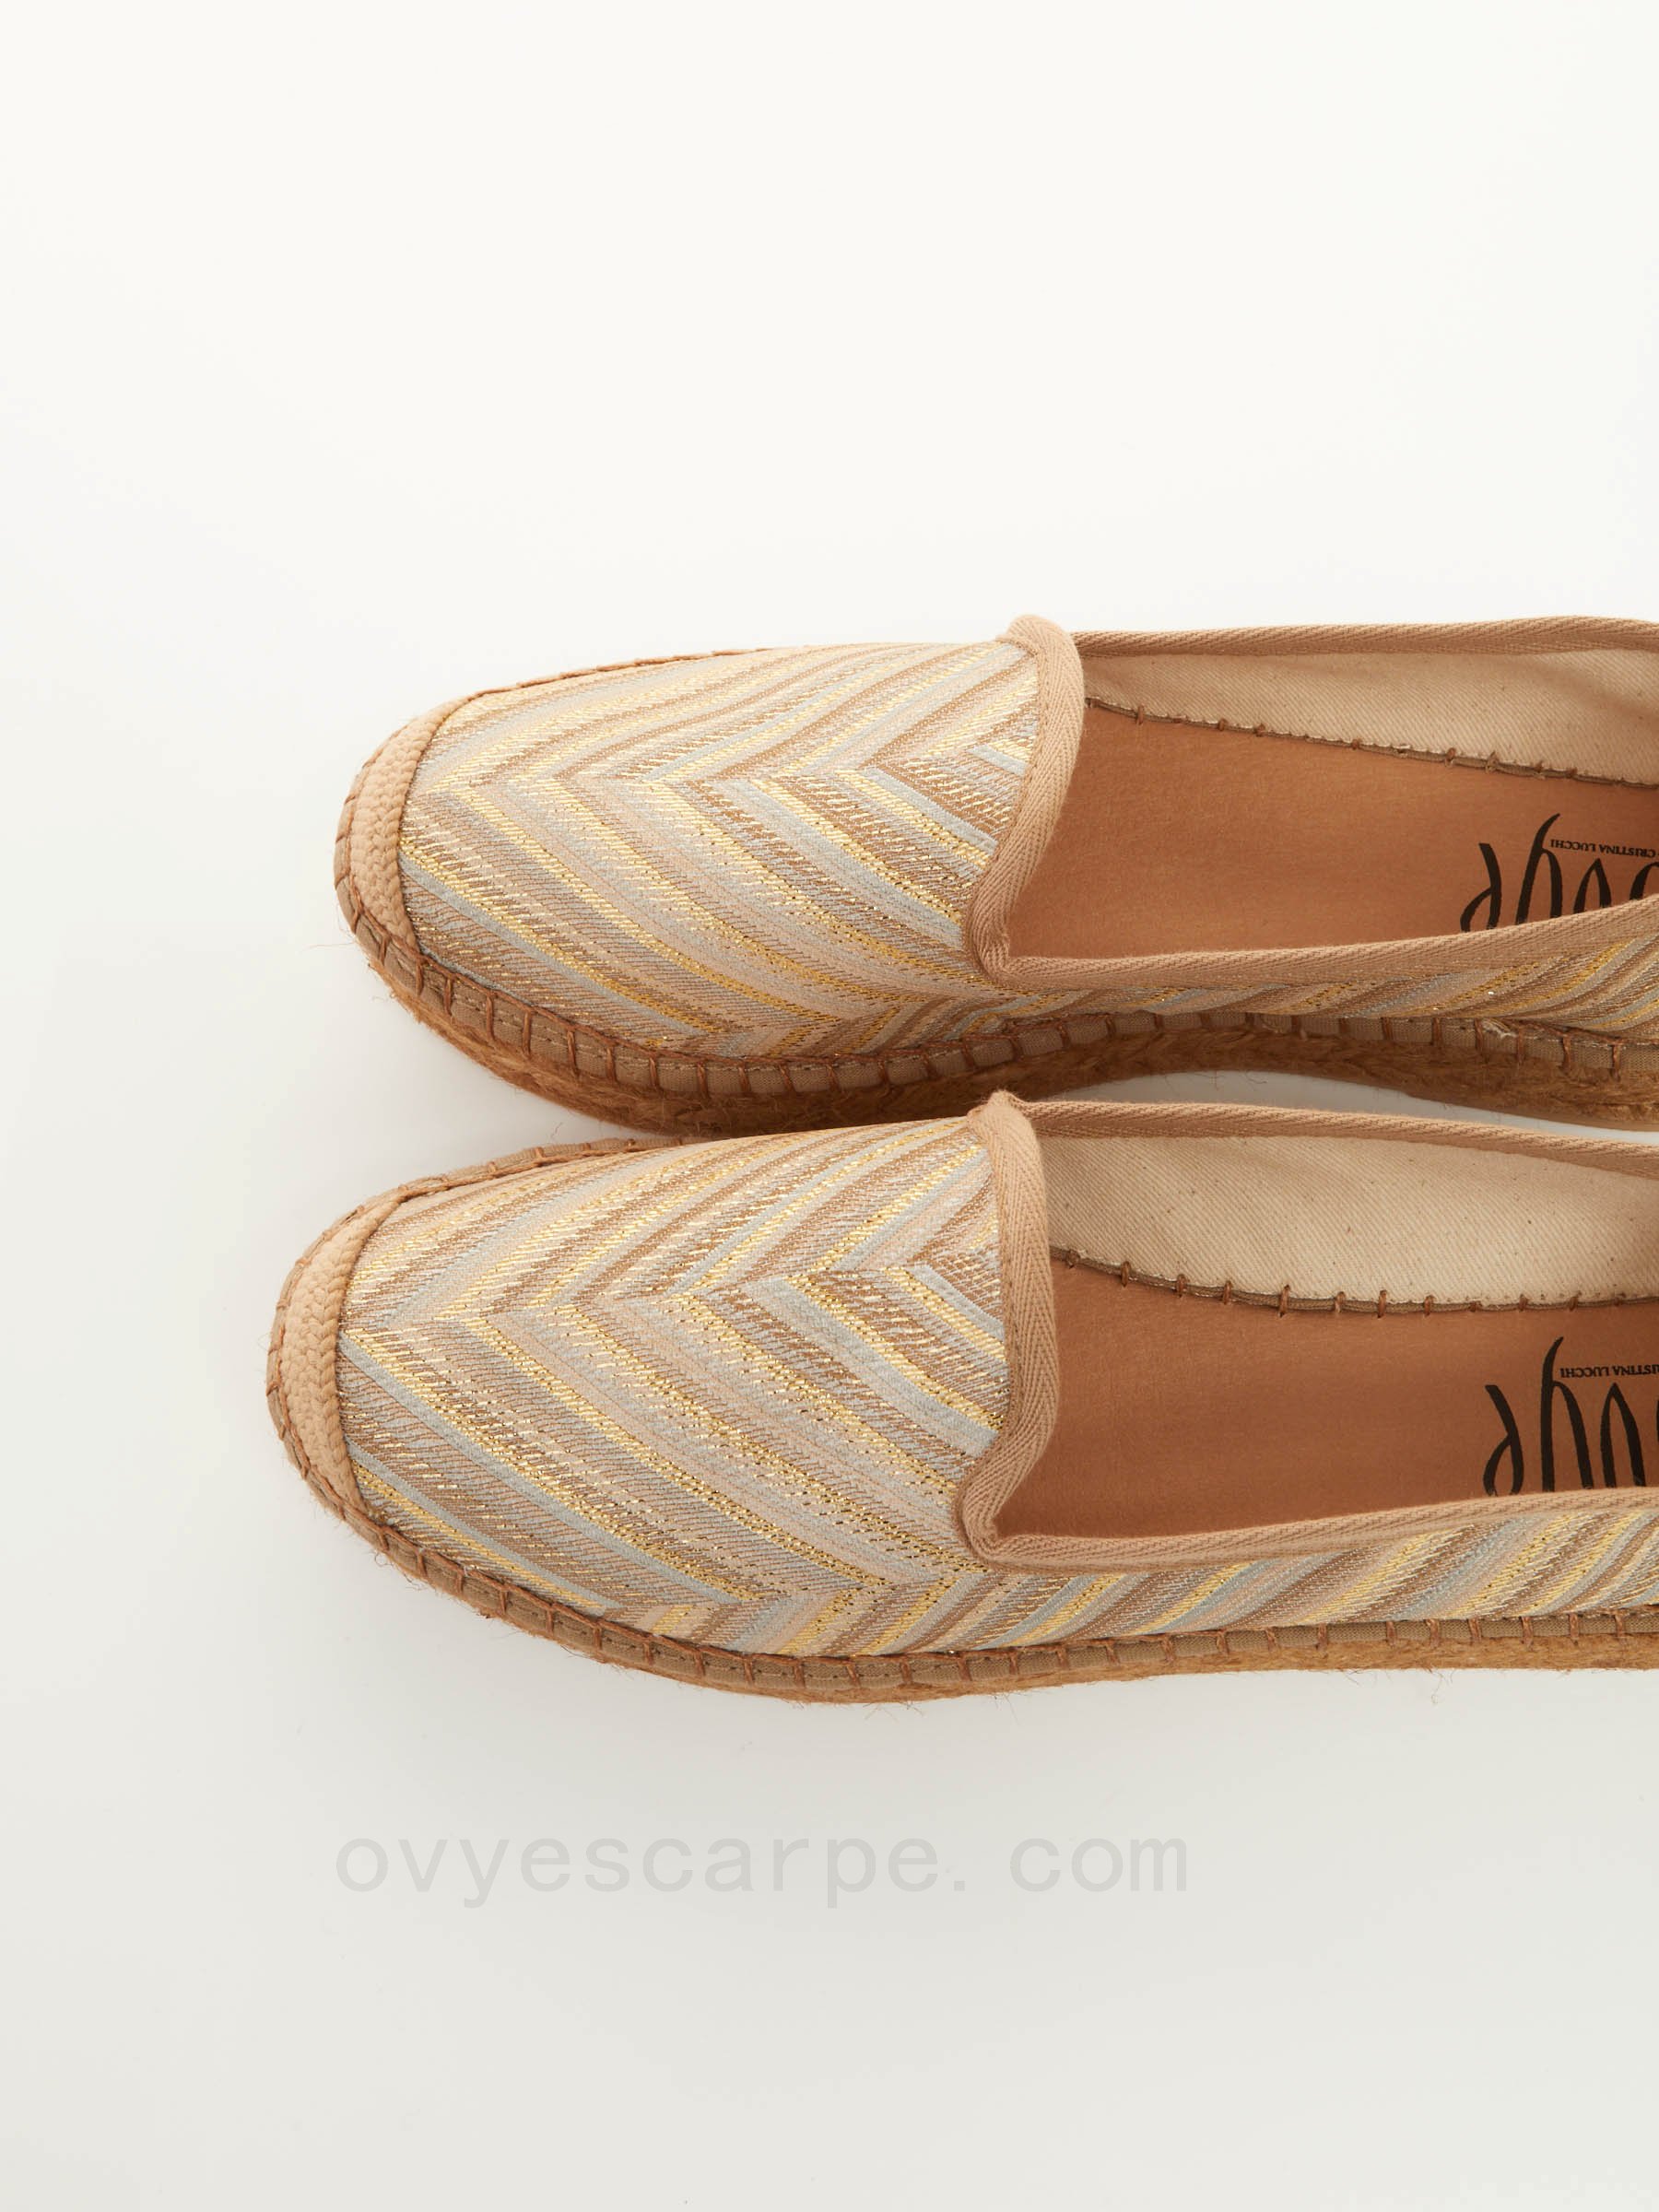 Outlet Shop Online Fabric Espadrillas F08161027-0790 ovy&#233; outlet